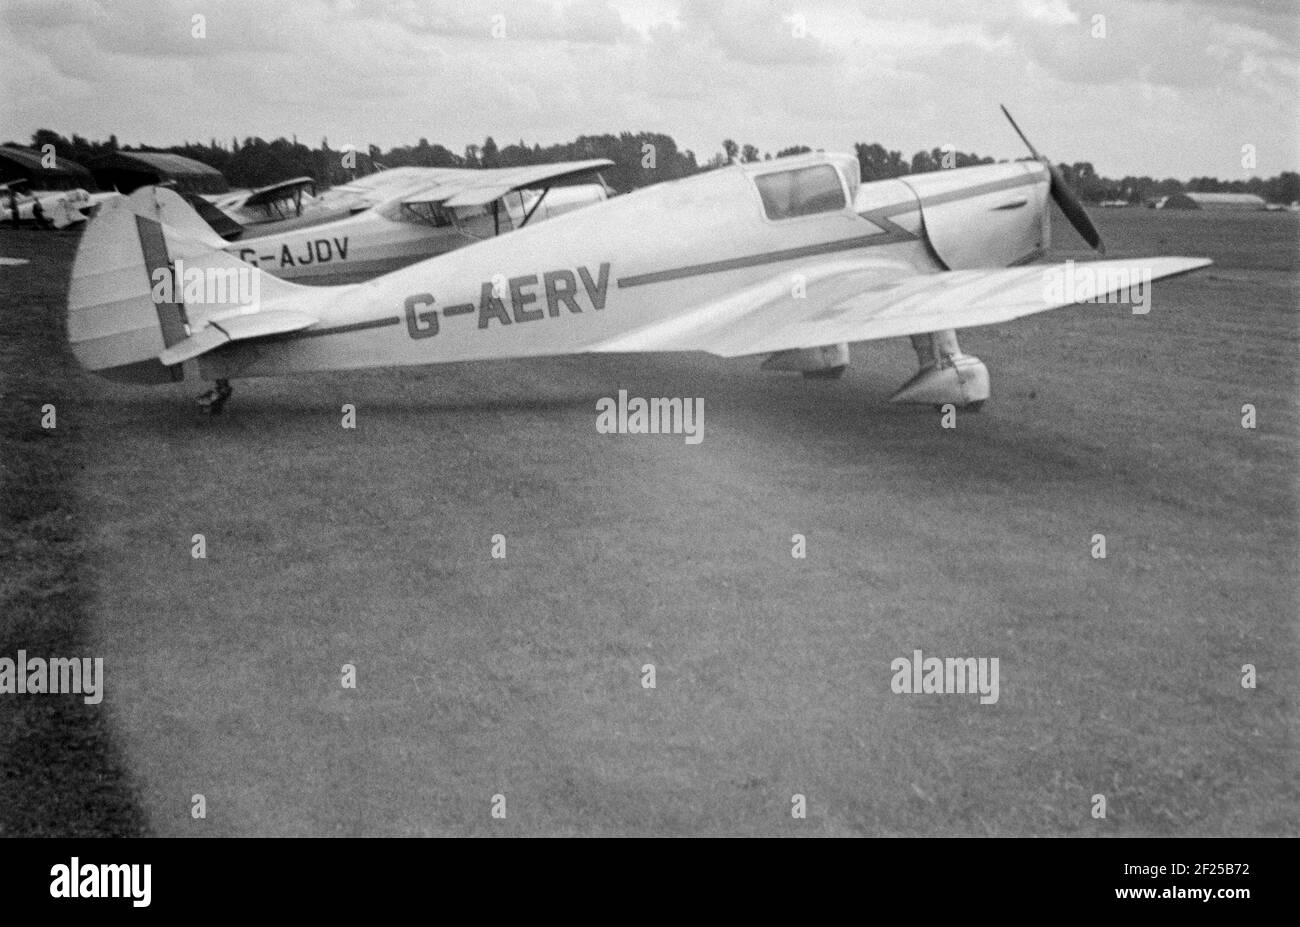 A vintage 1958 black and white photograph of a Miles M.11A Whitney Straight light aircraft, registration G-AERV, taken at an airfield in England. Stock Photo